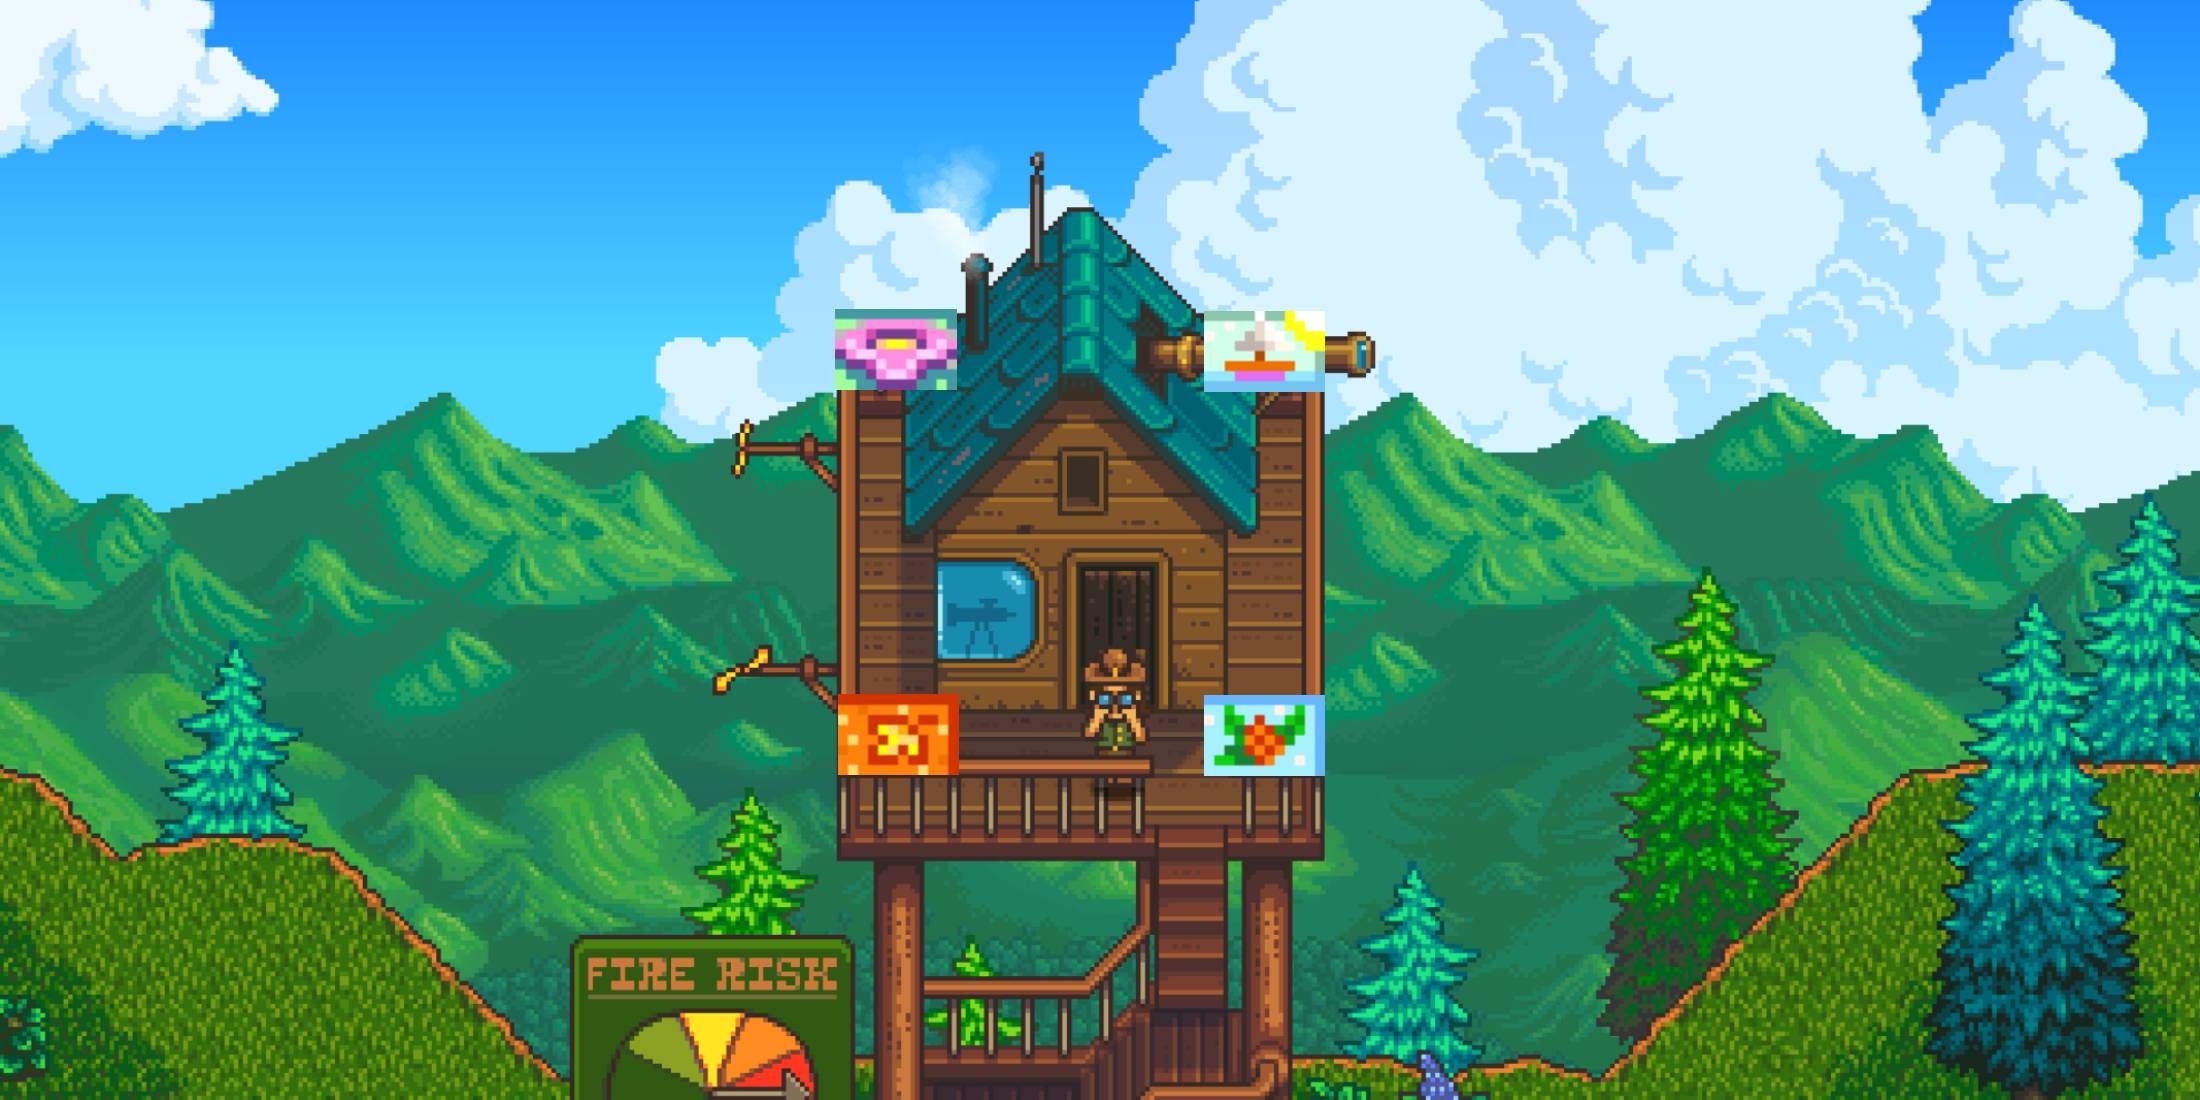 The firewatch tower from Haunted Chocolatier with the season emblems from Stardew Valley